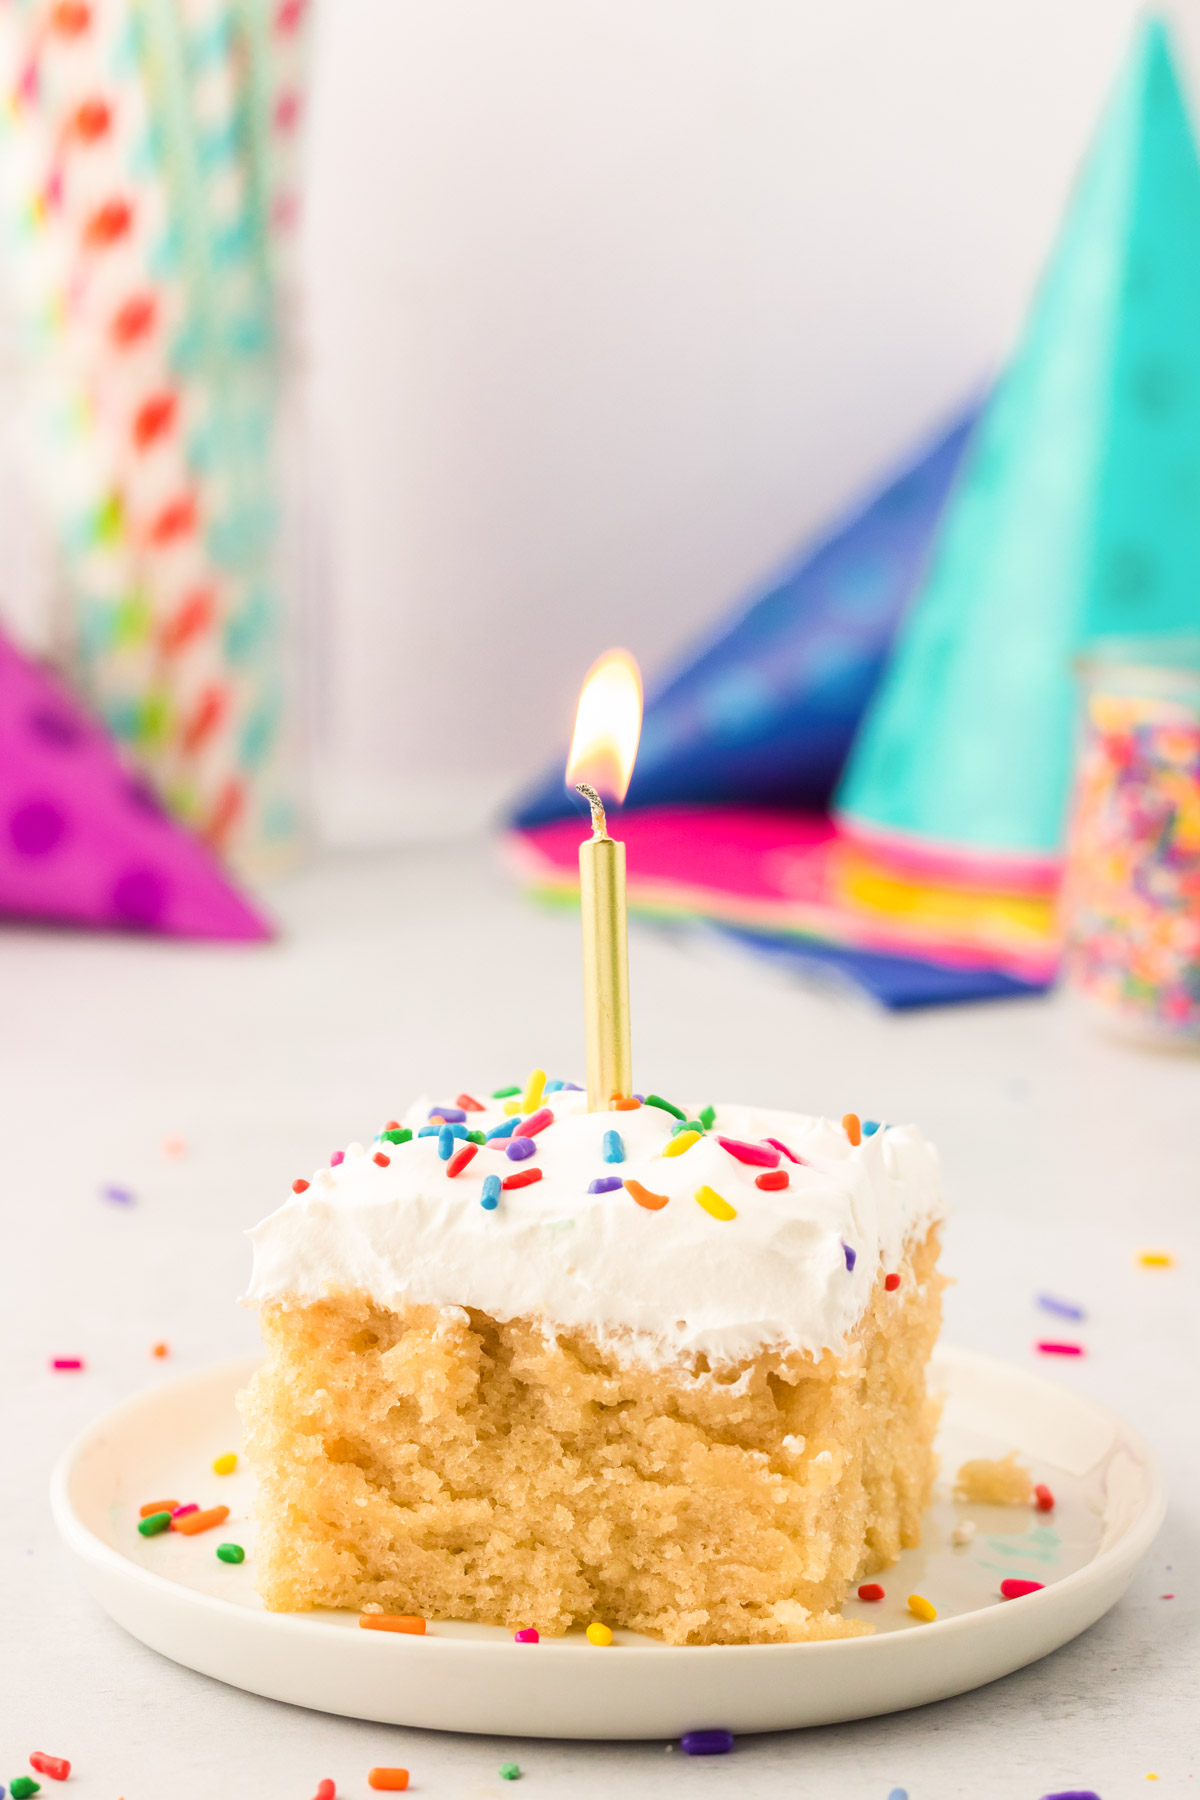 A square slice on vanilla wacky cake on a white plate with a gold birthday candle in it.